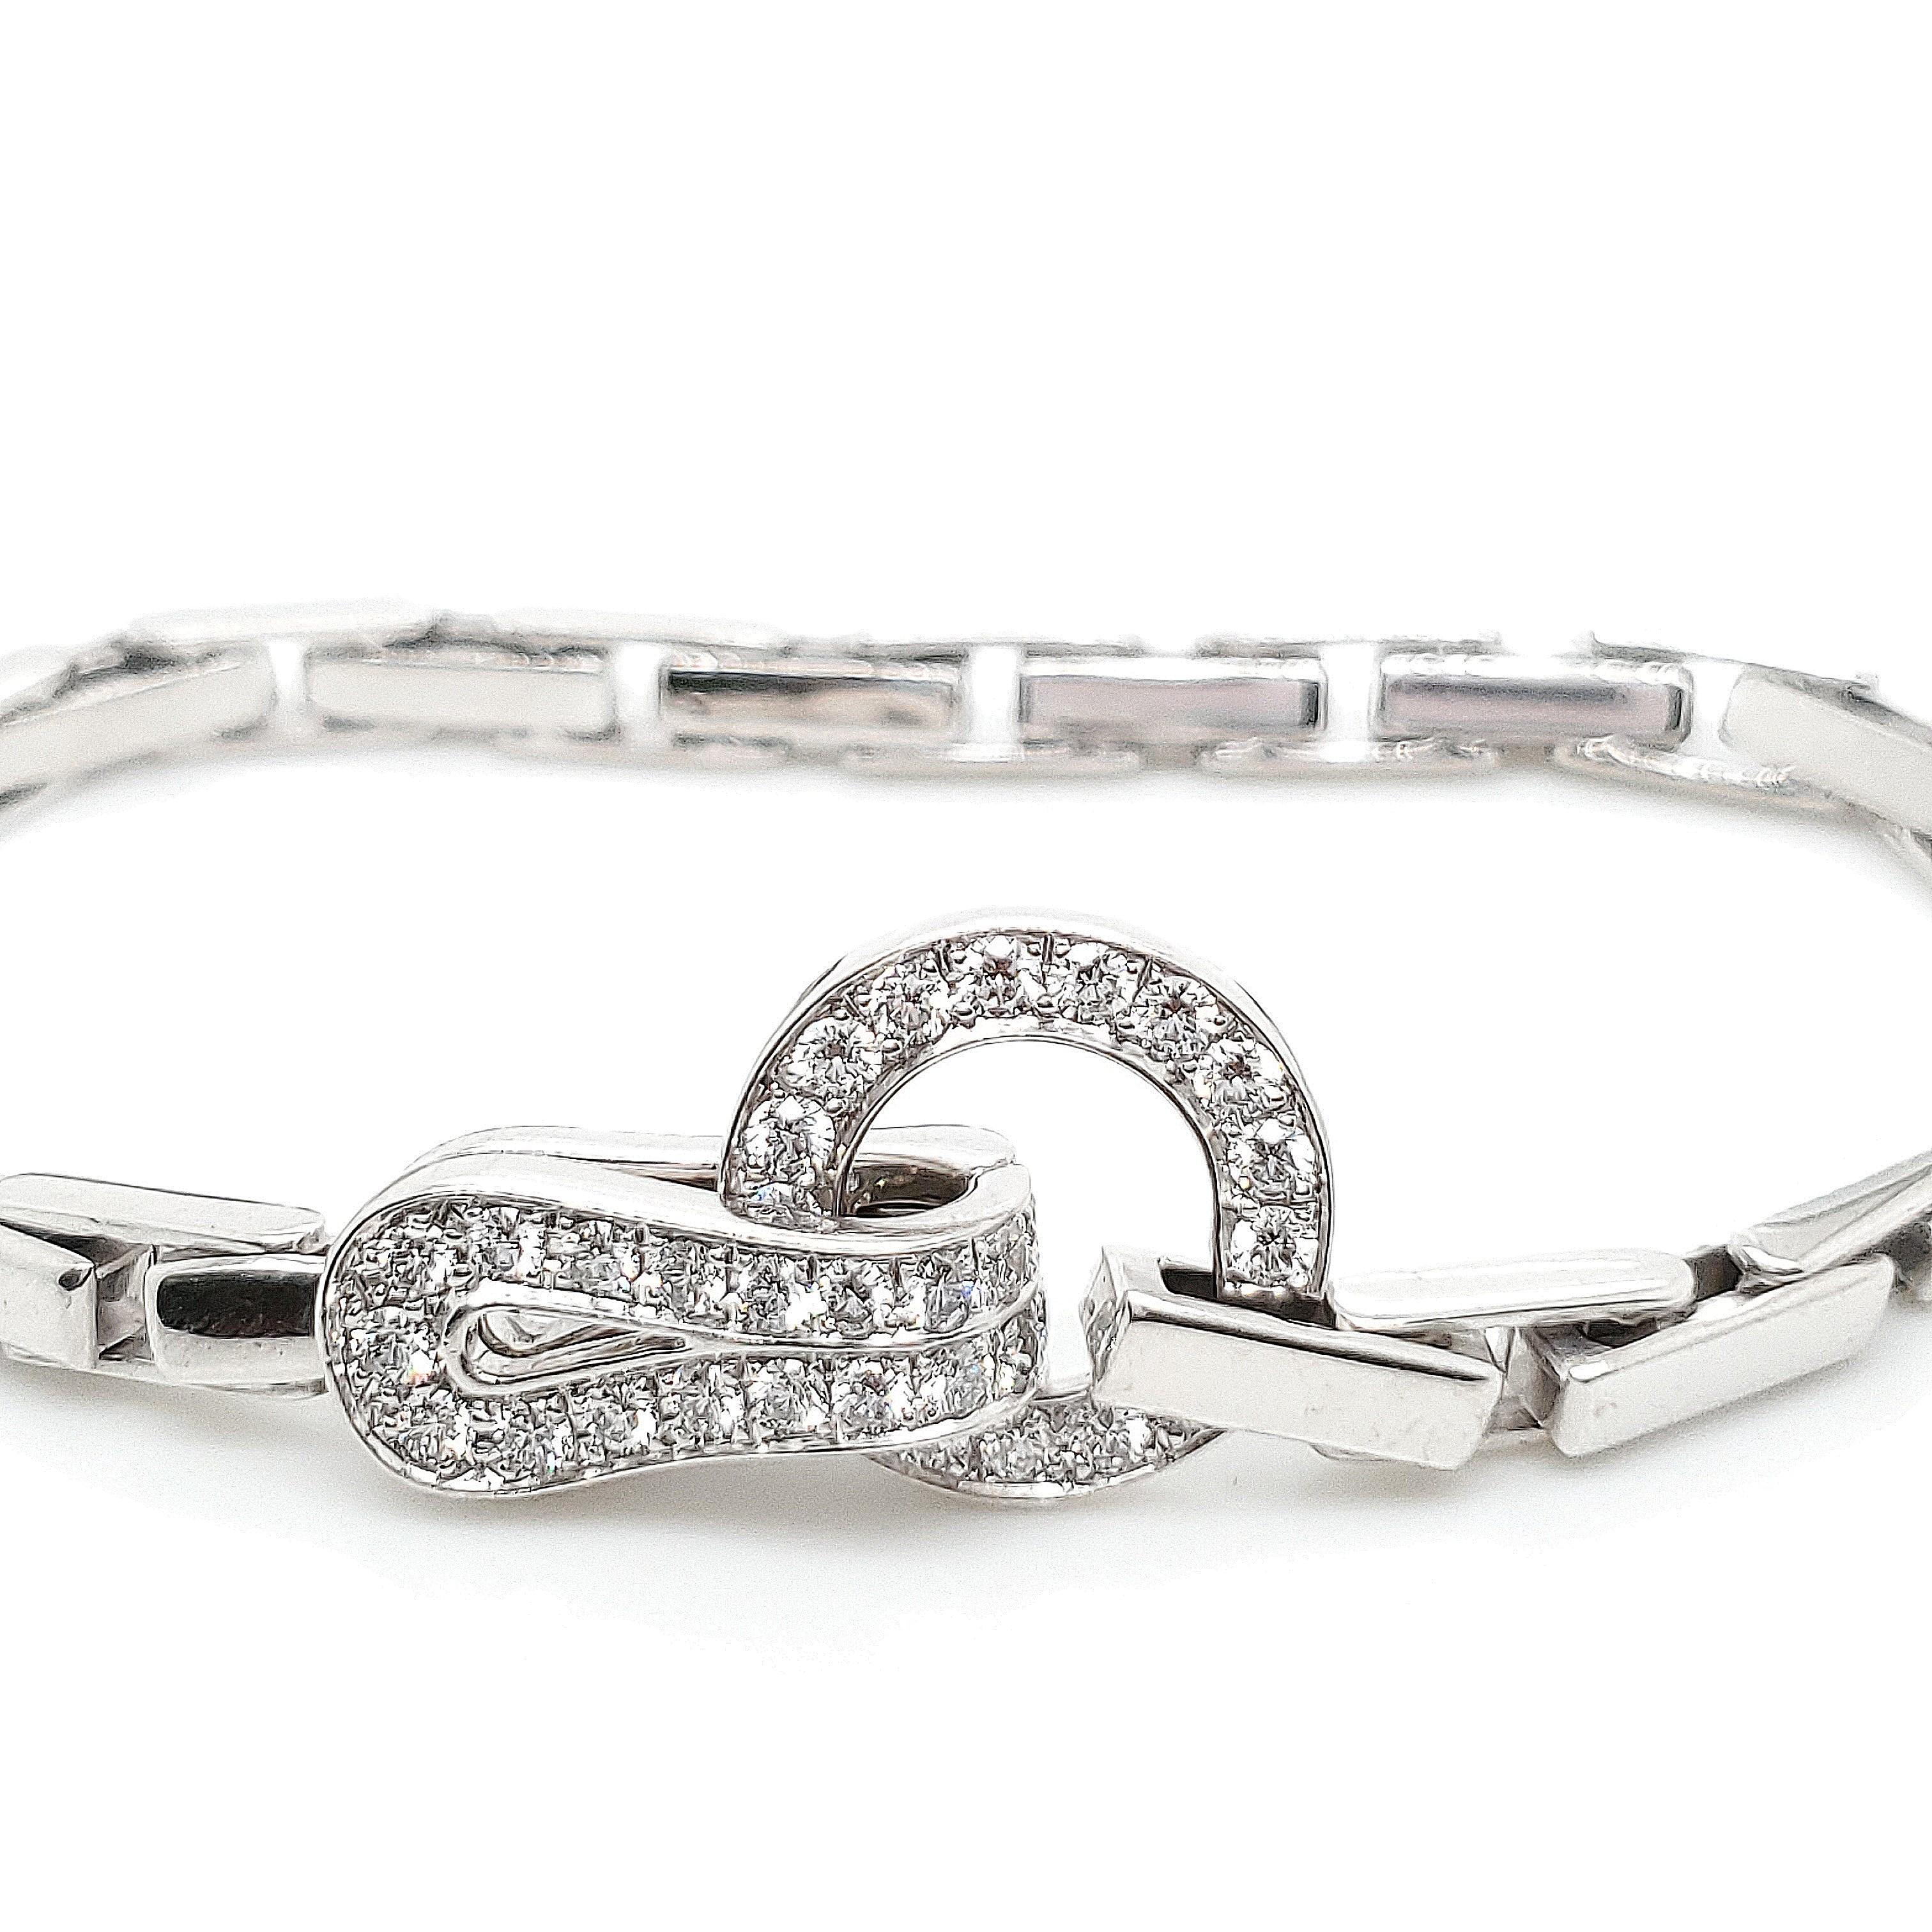 Authentic Cartier 'Agrafe' bracelet crafted in 18 karat white gold. The hook shape clasp looks like an “Agrafe” as it means in French a clasp or hook. Clasp is set with approx. 1.05 carats of round brilliant cut diamonds (F color, VS clarity).